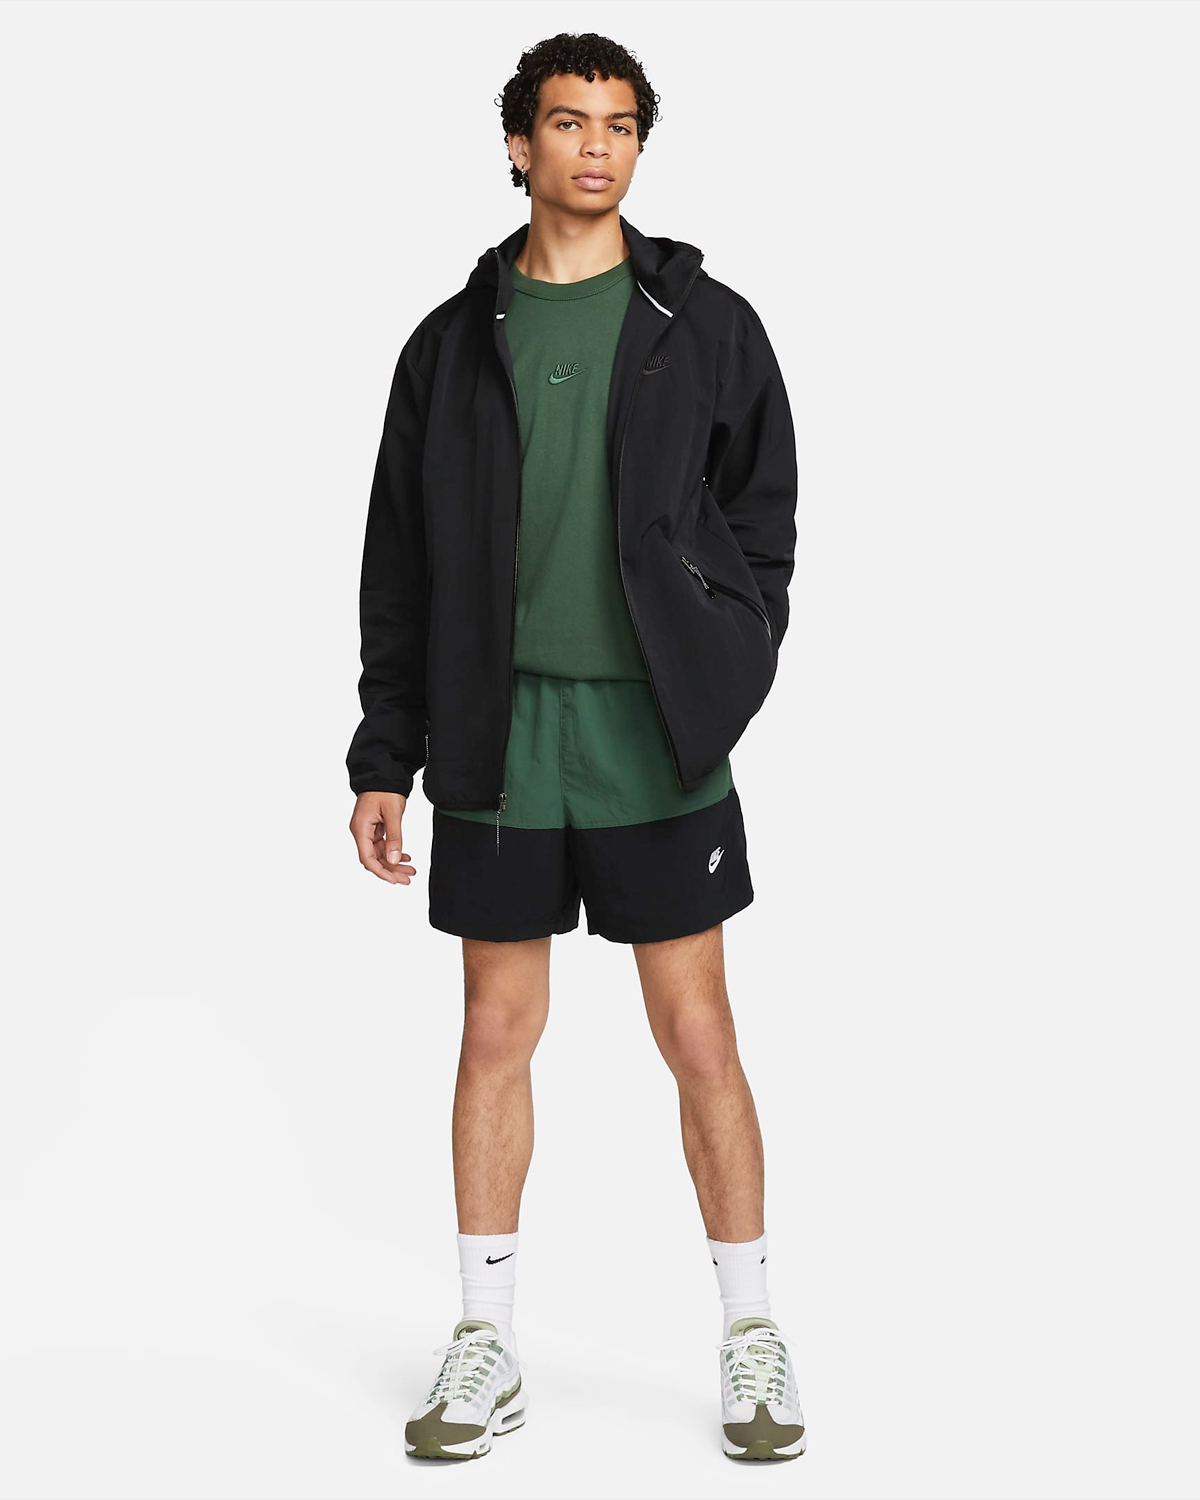 Nike-Club-Woven-Color-Blocked-Shorts-Fir-Green-Black-Outfit